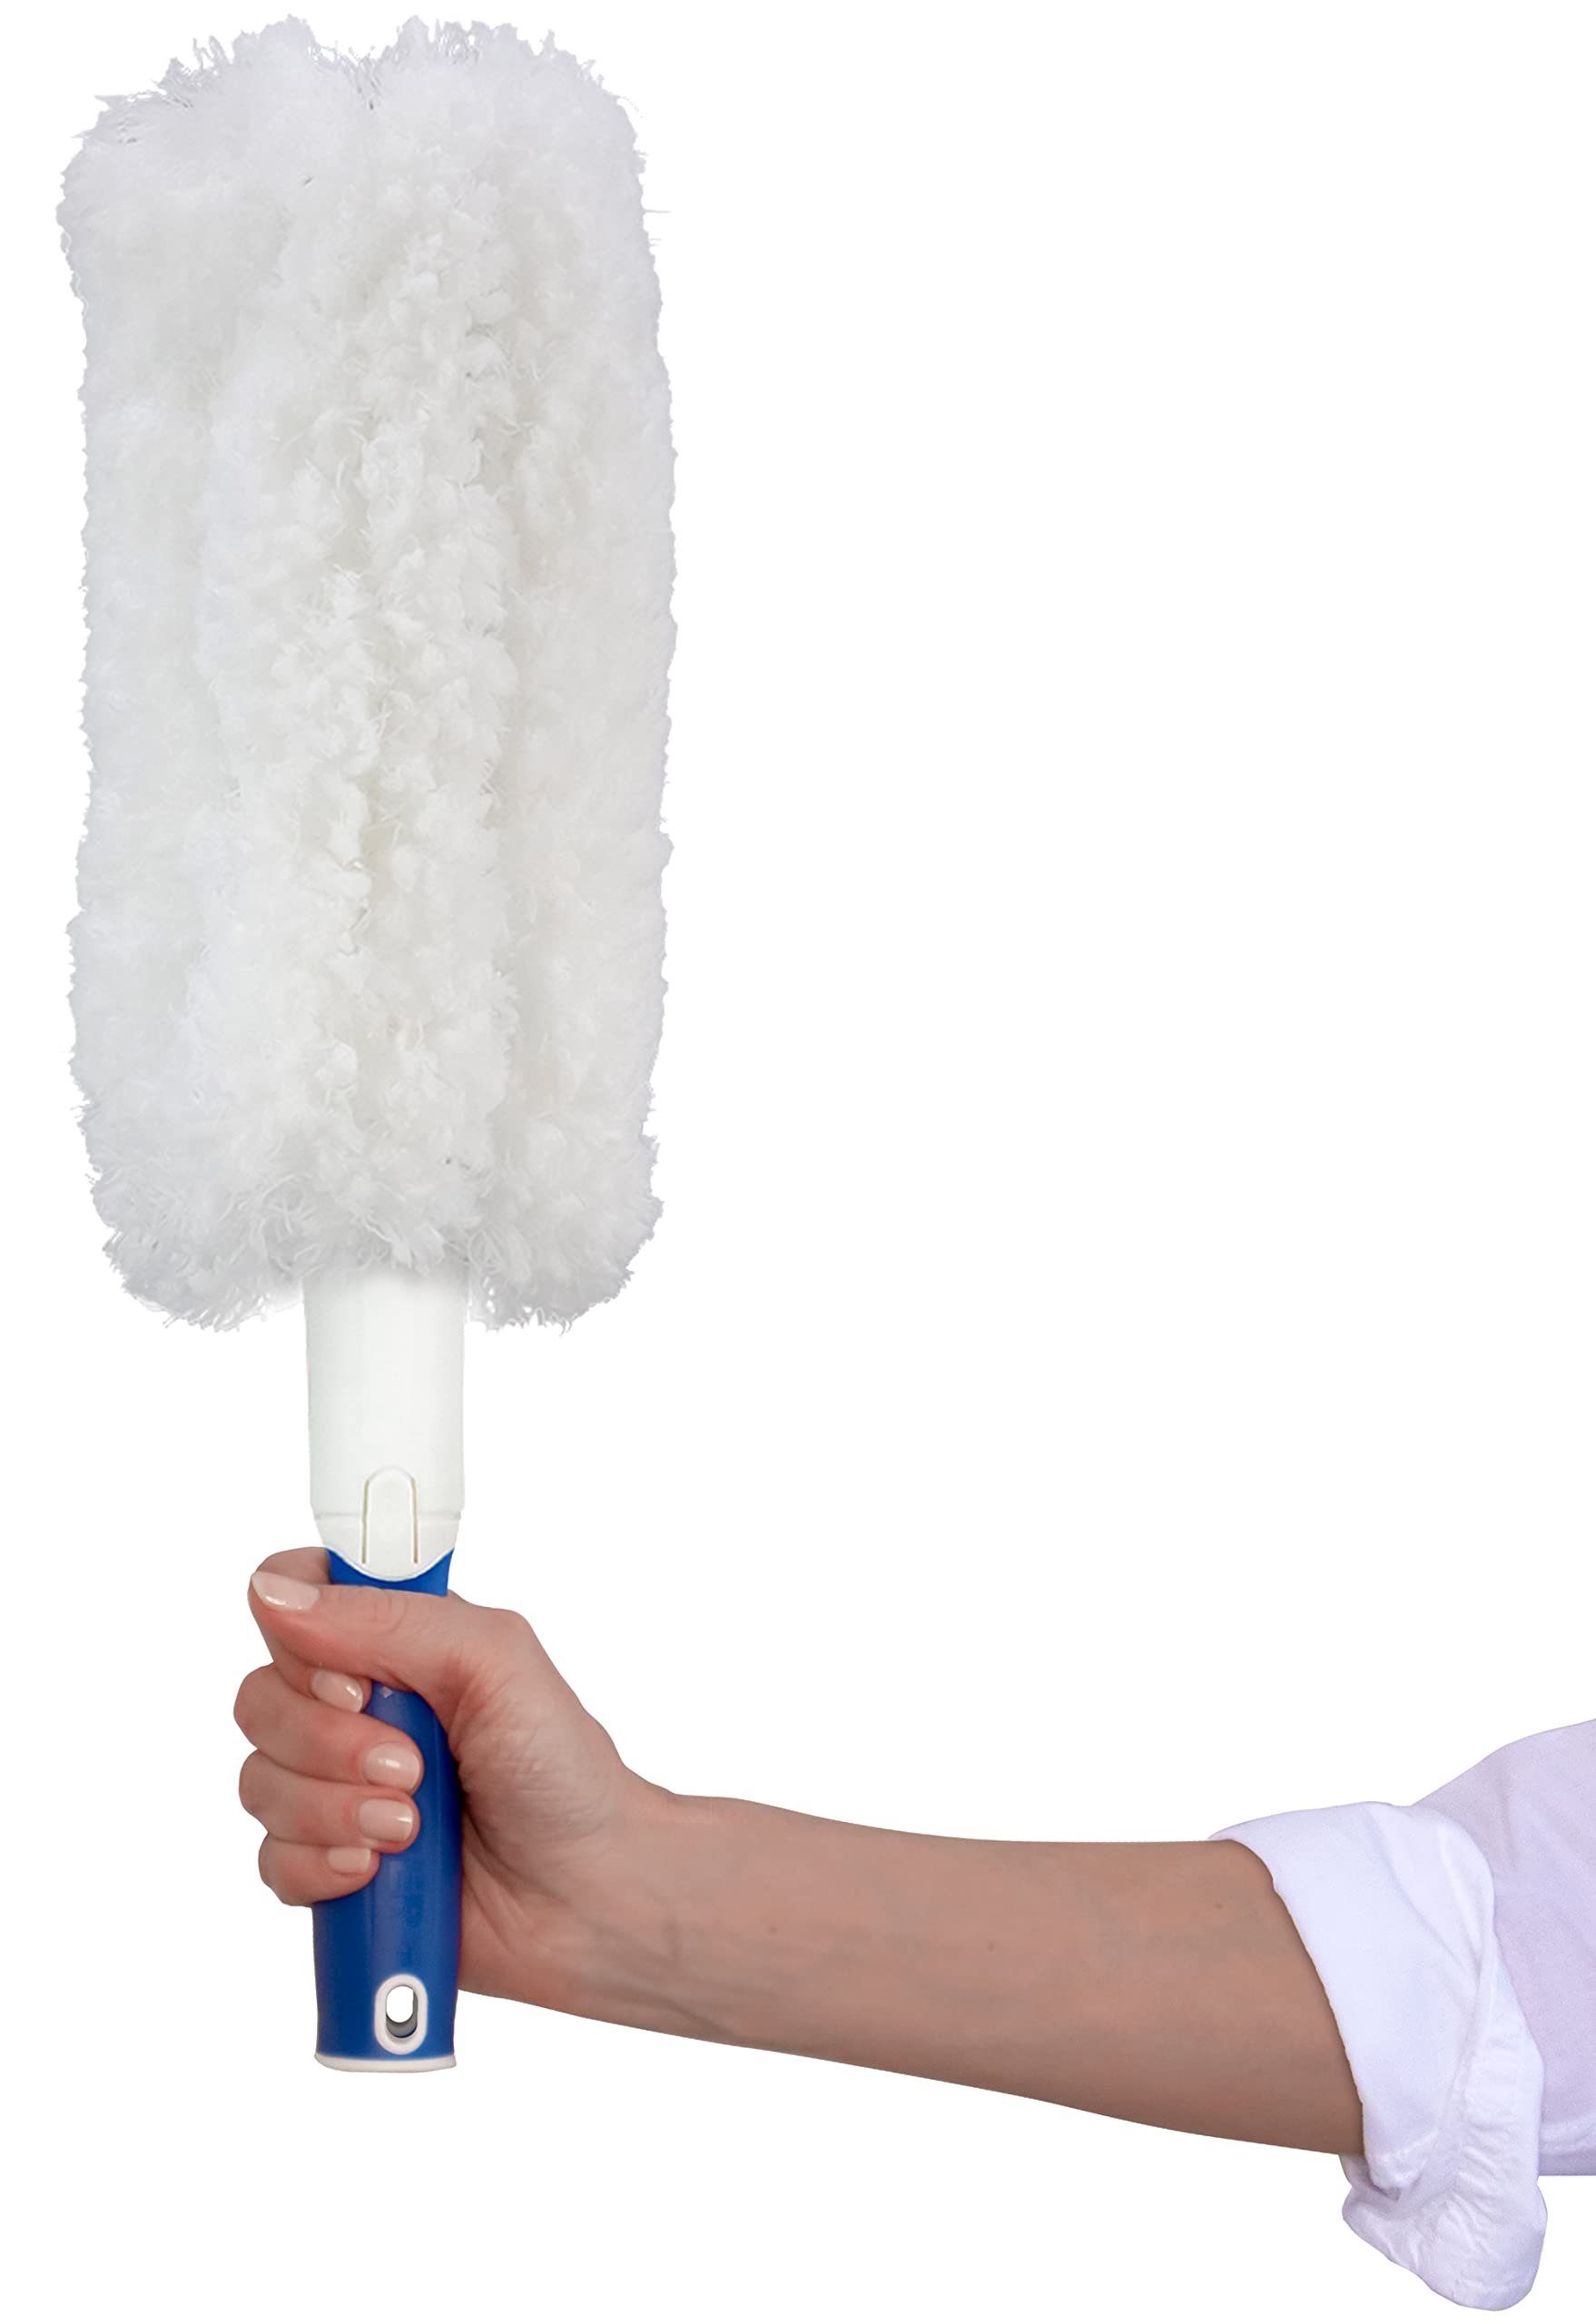 Unger Microfiber Wool Duster - Compatible with Poles, Pet Hair & Dust Cleaner, TVs, Molding, Electronics & Furniture